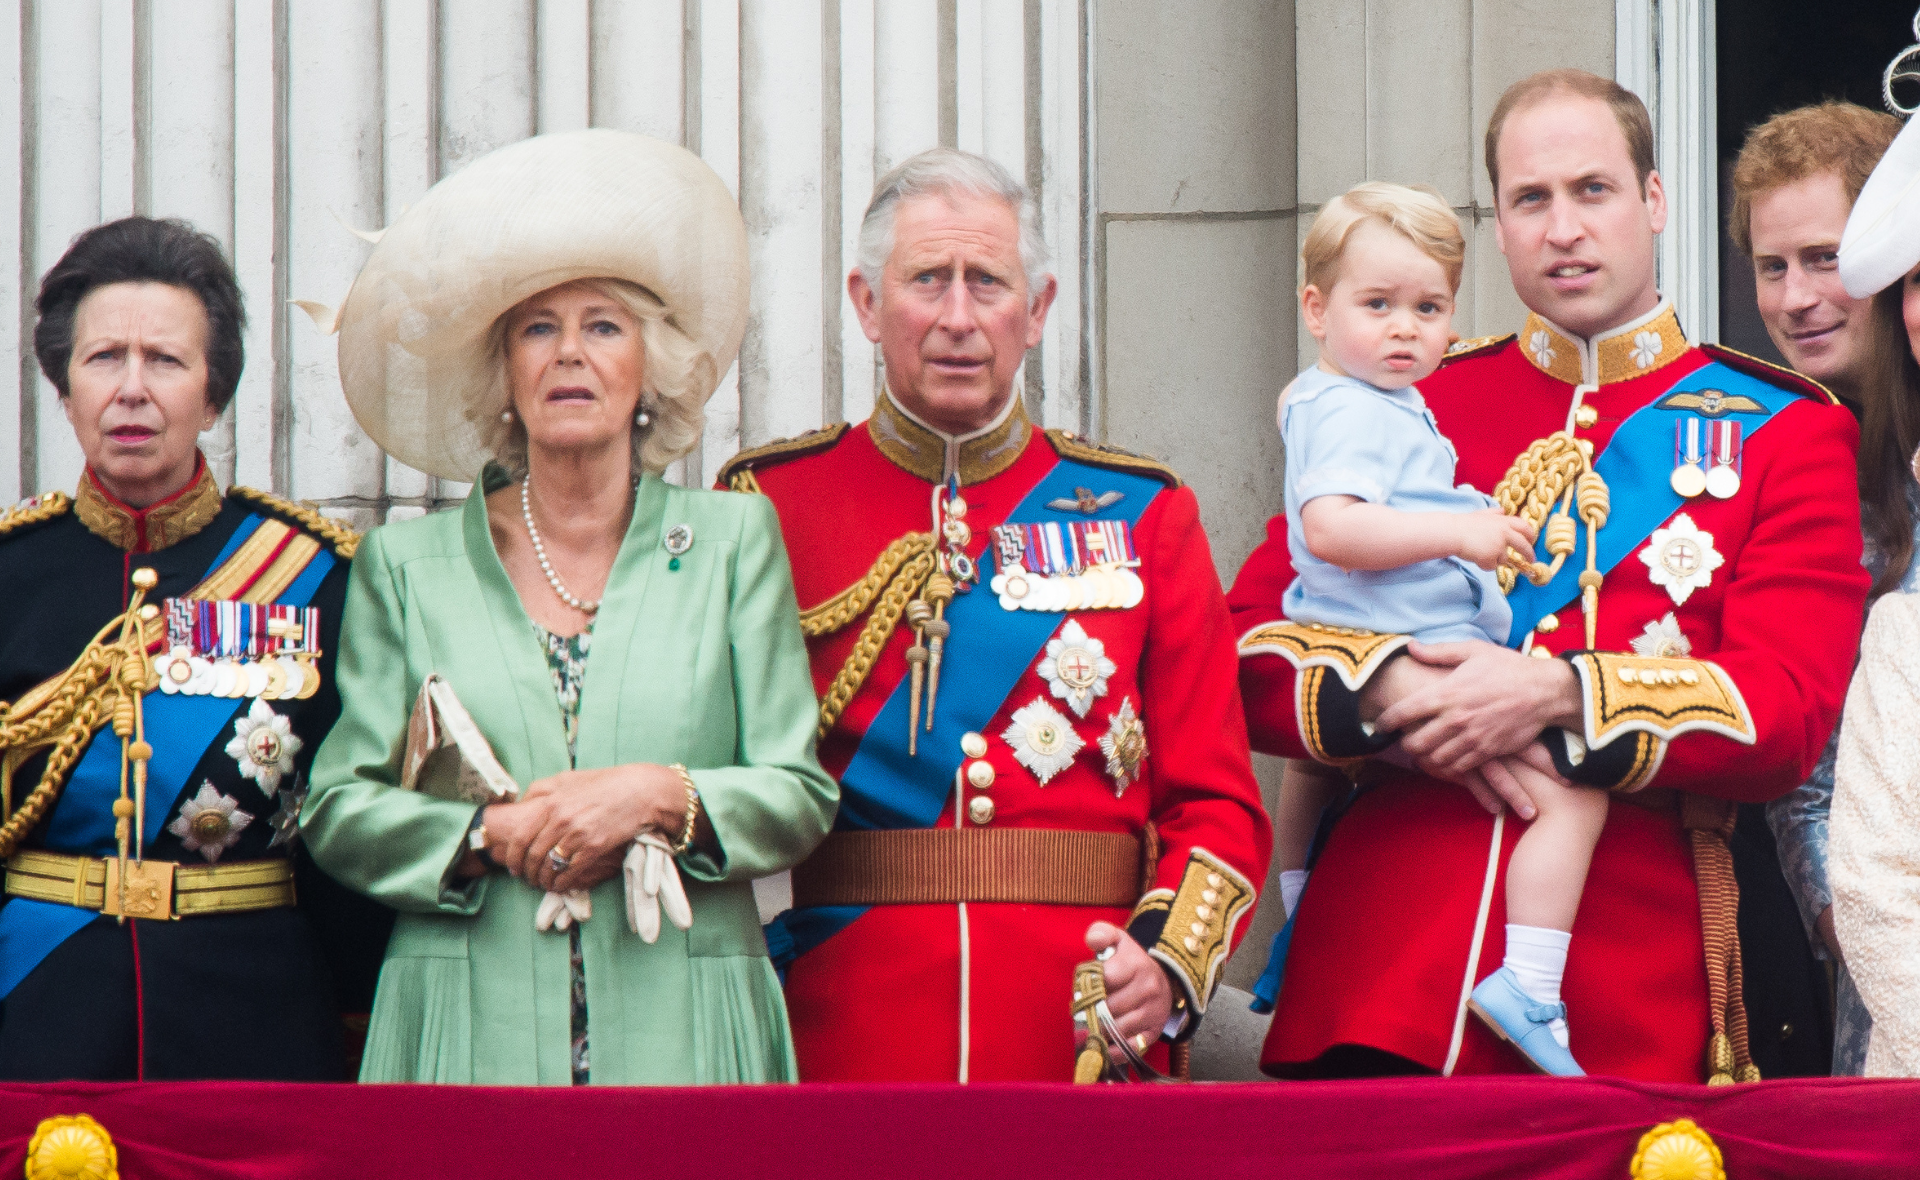 Who will assume Royal duties while King Charles battles cancer?